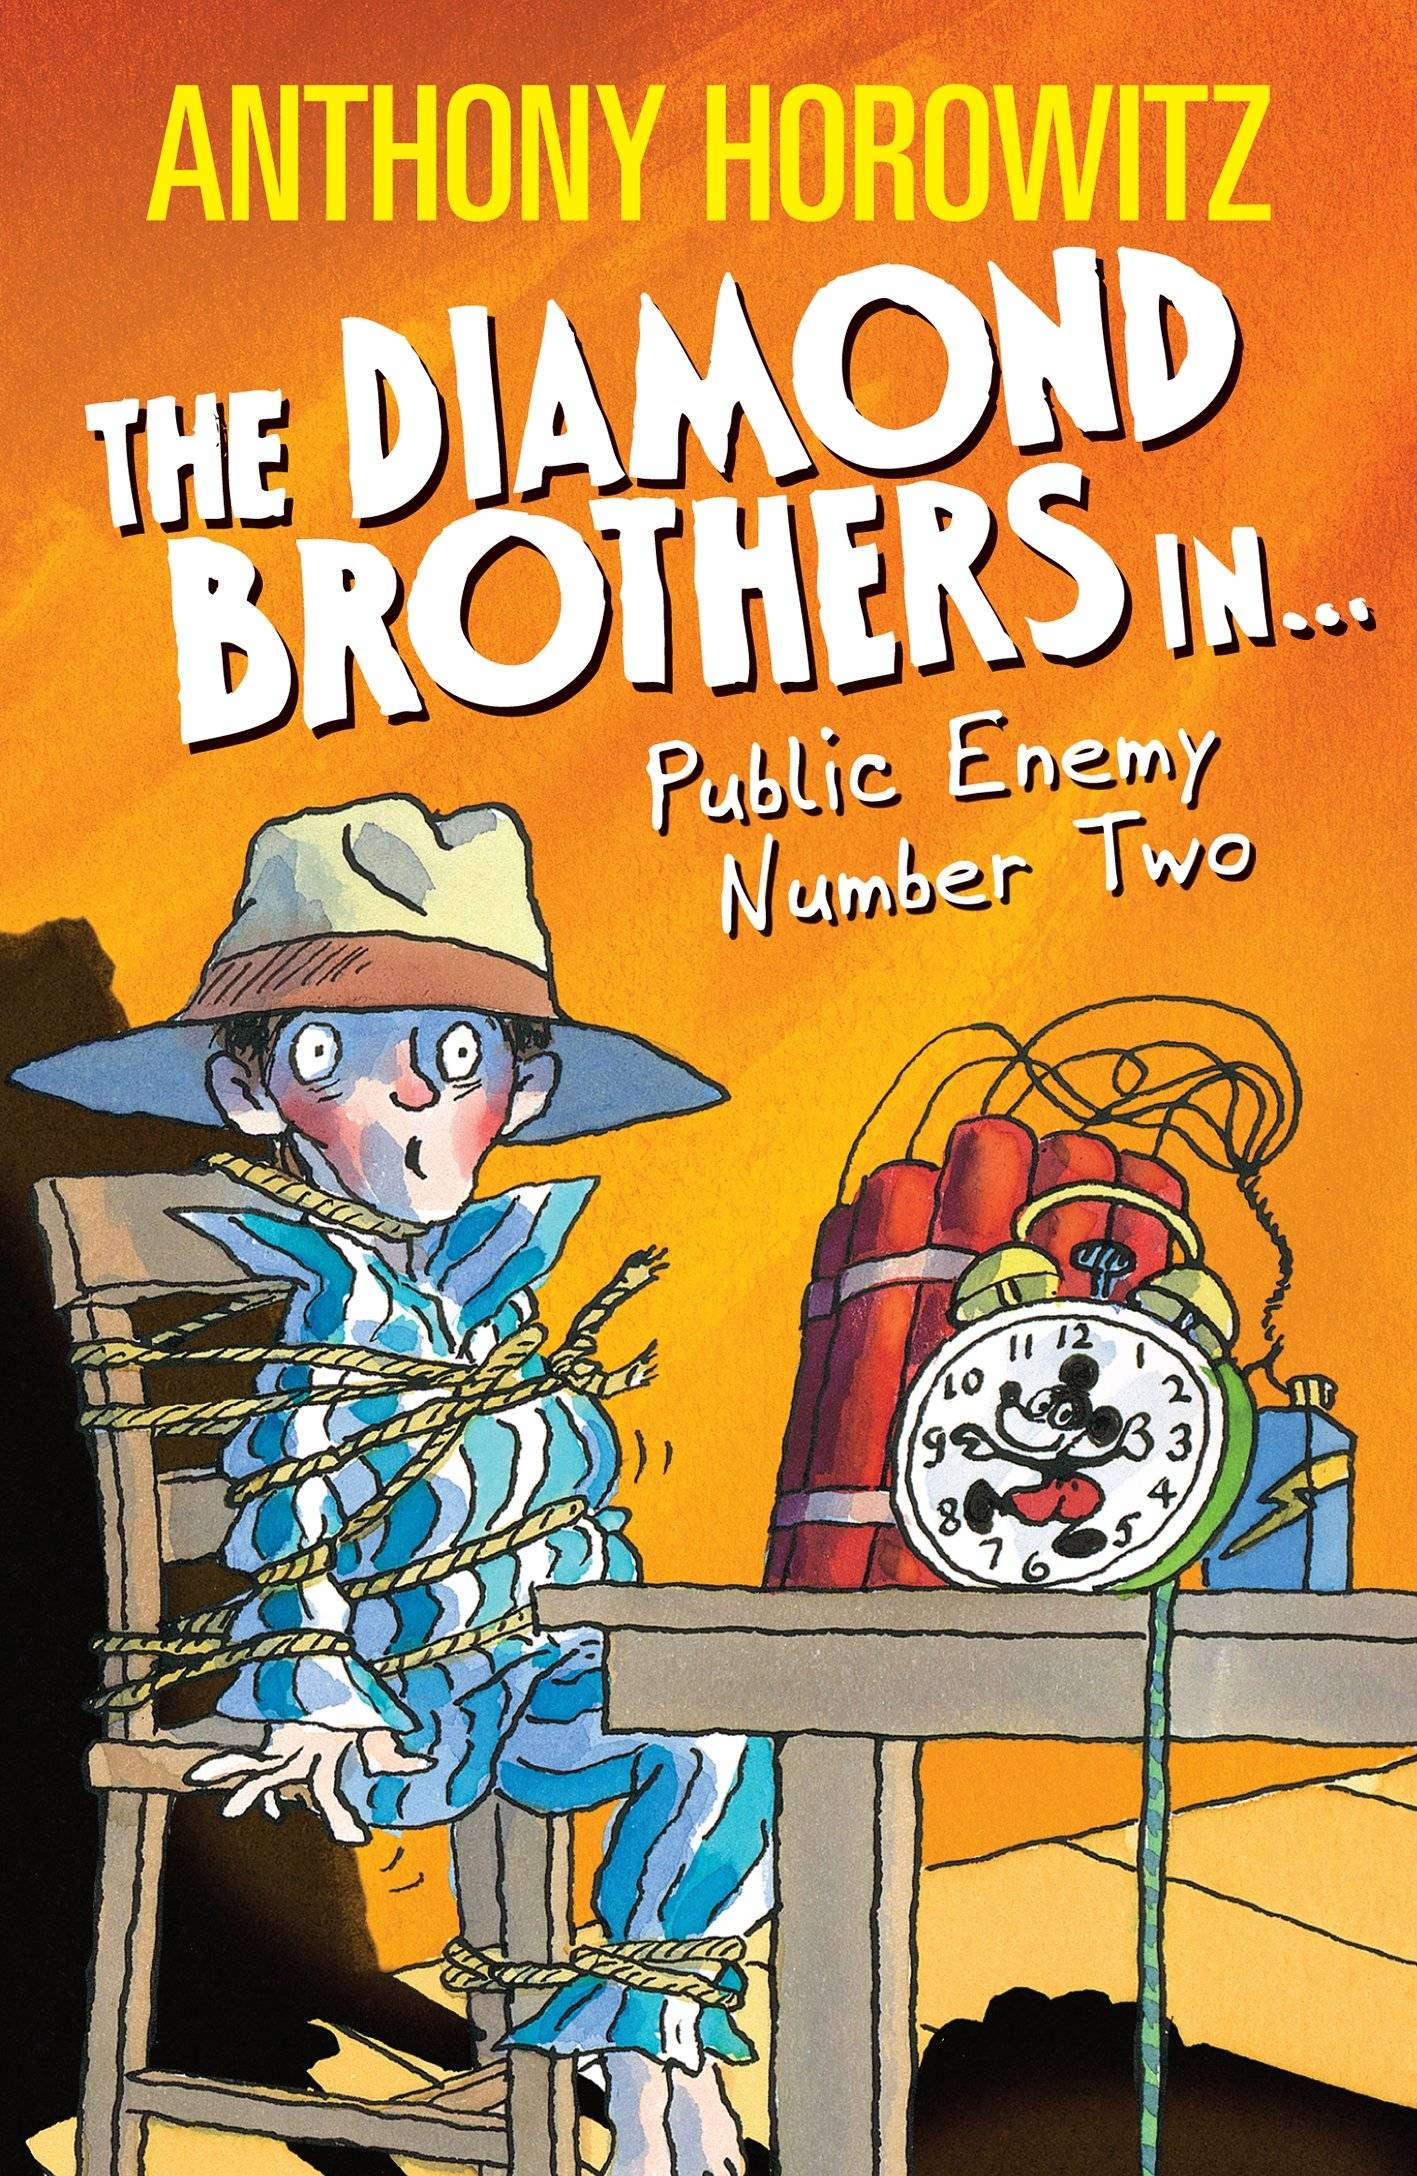 IMG : The Diamond Brothers in Public enemy number 2